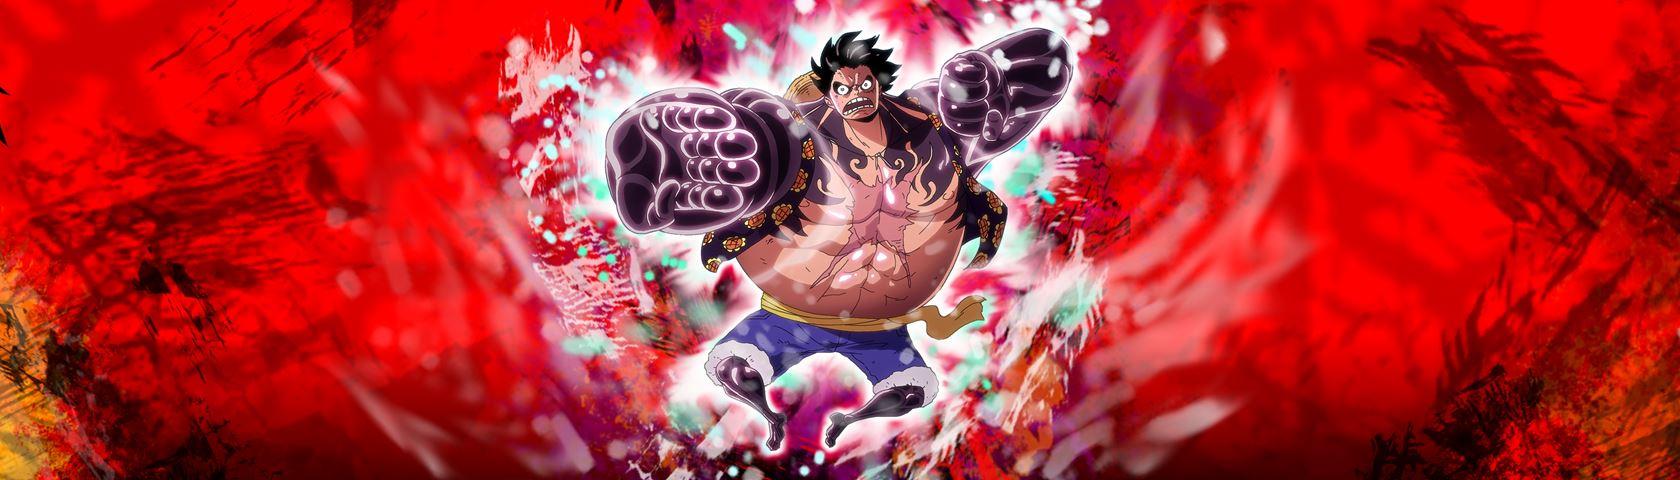 One Piece Luffy Triple Monitor Wallpaper HD • Image • WallpaperFusion by Binary Fortress Software